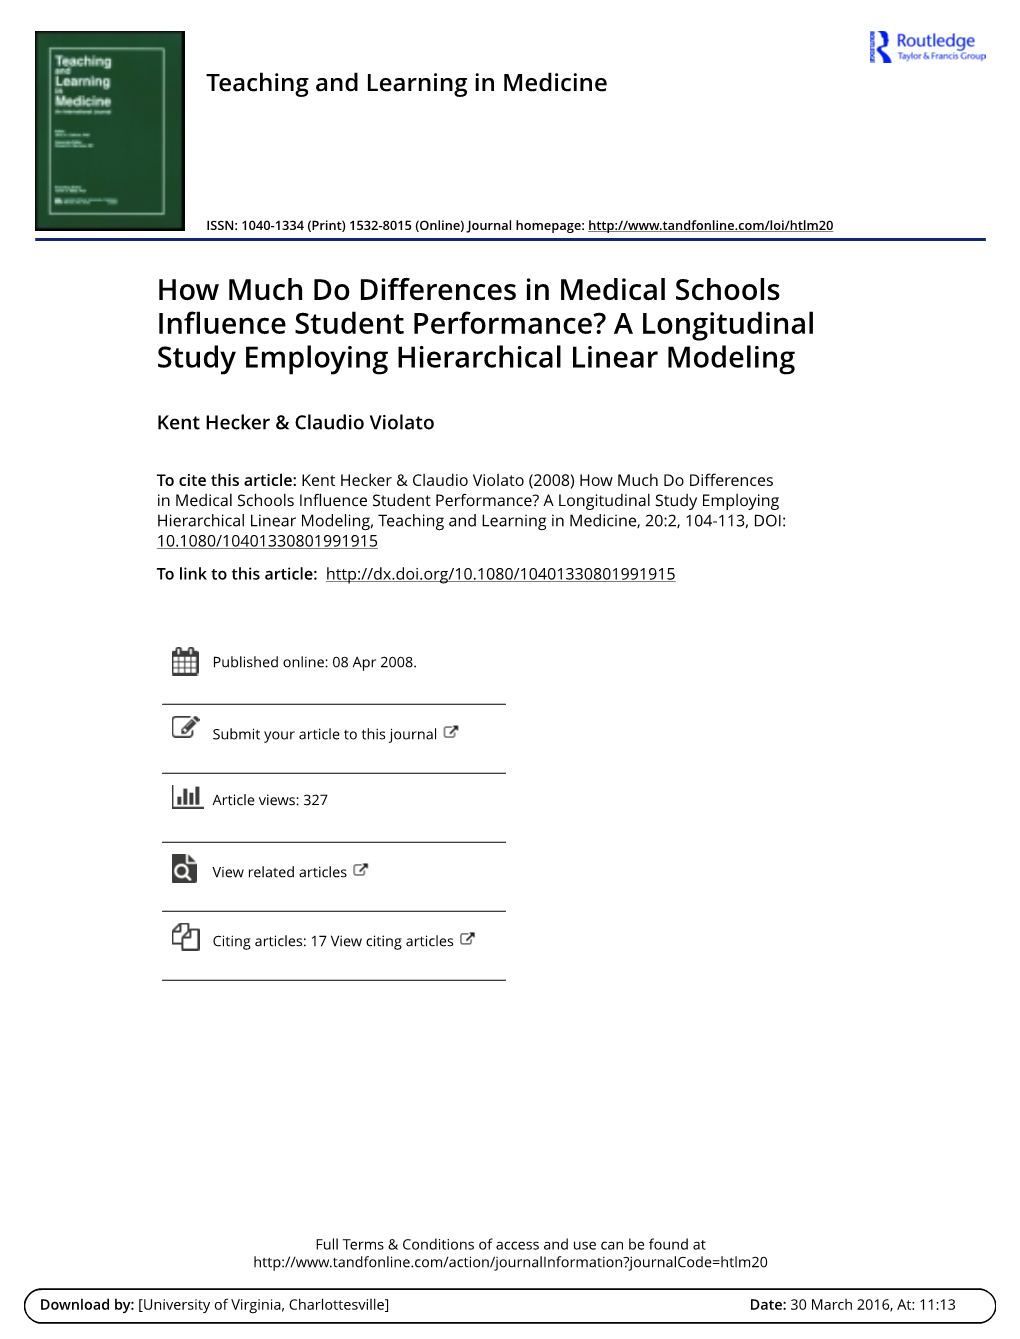 A Longitudinal Study Employing Hierarchical Linear Modeling